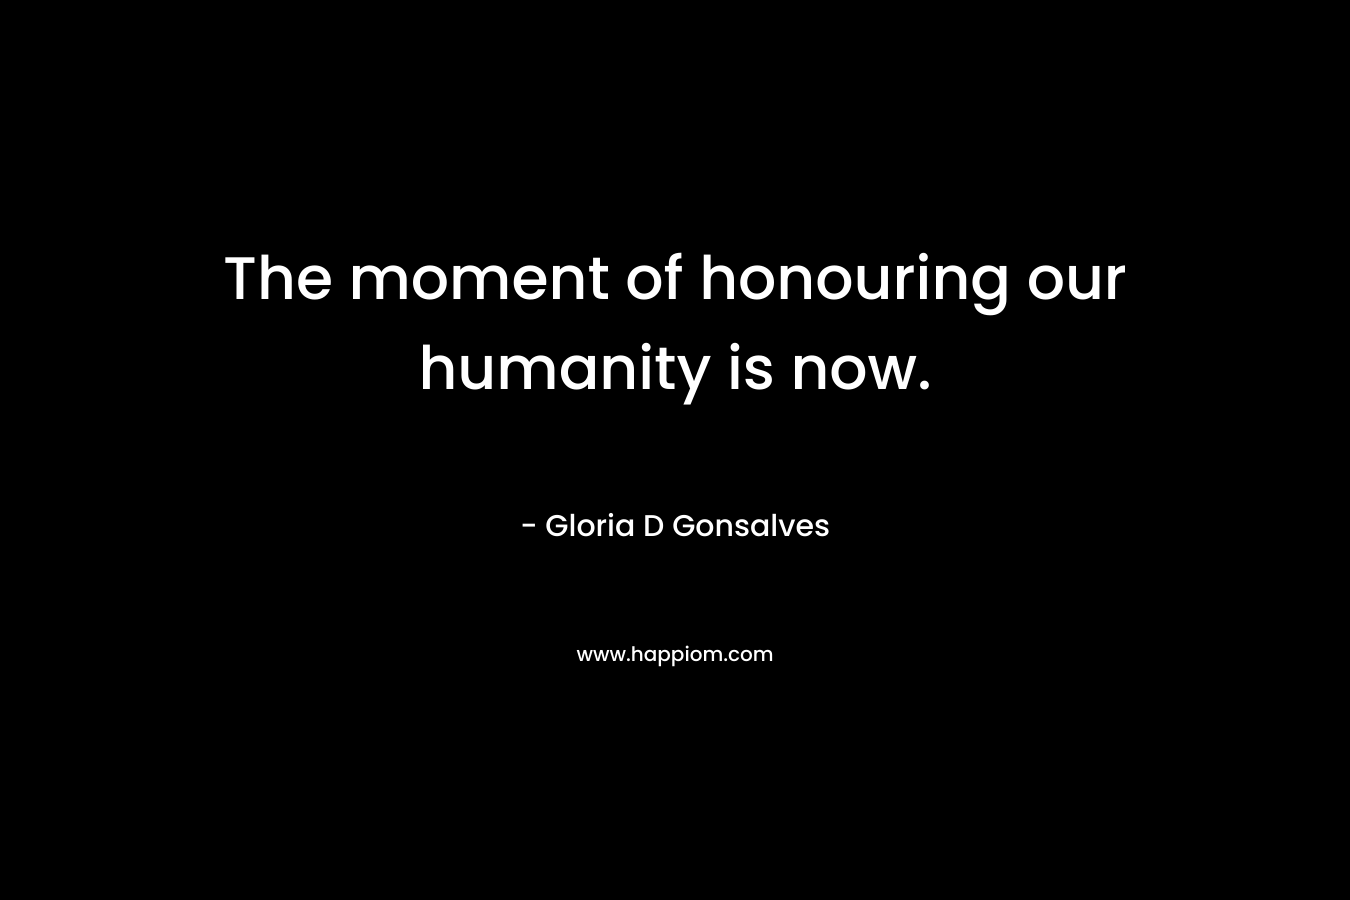 The moment of honouring our humanity is now.